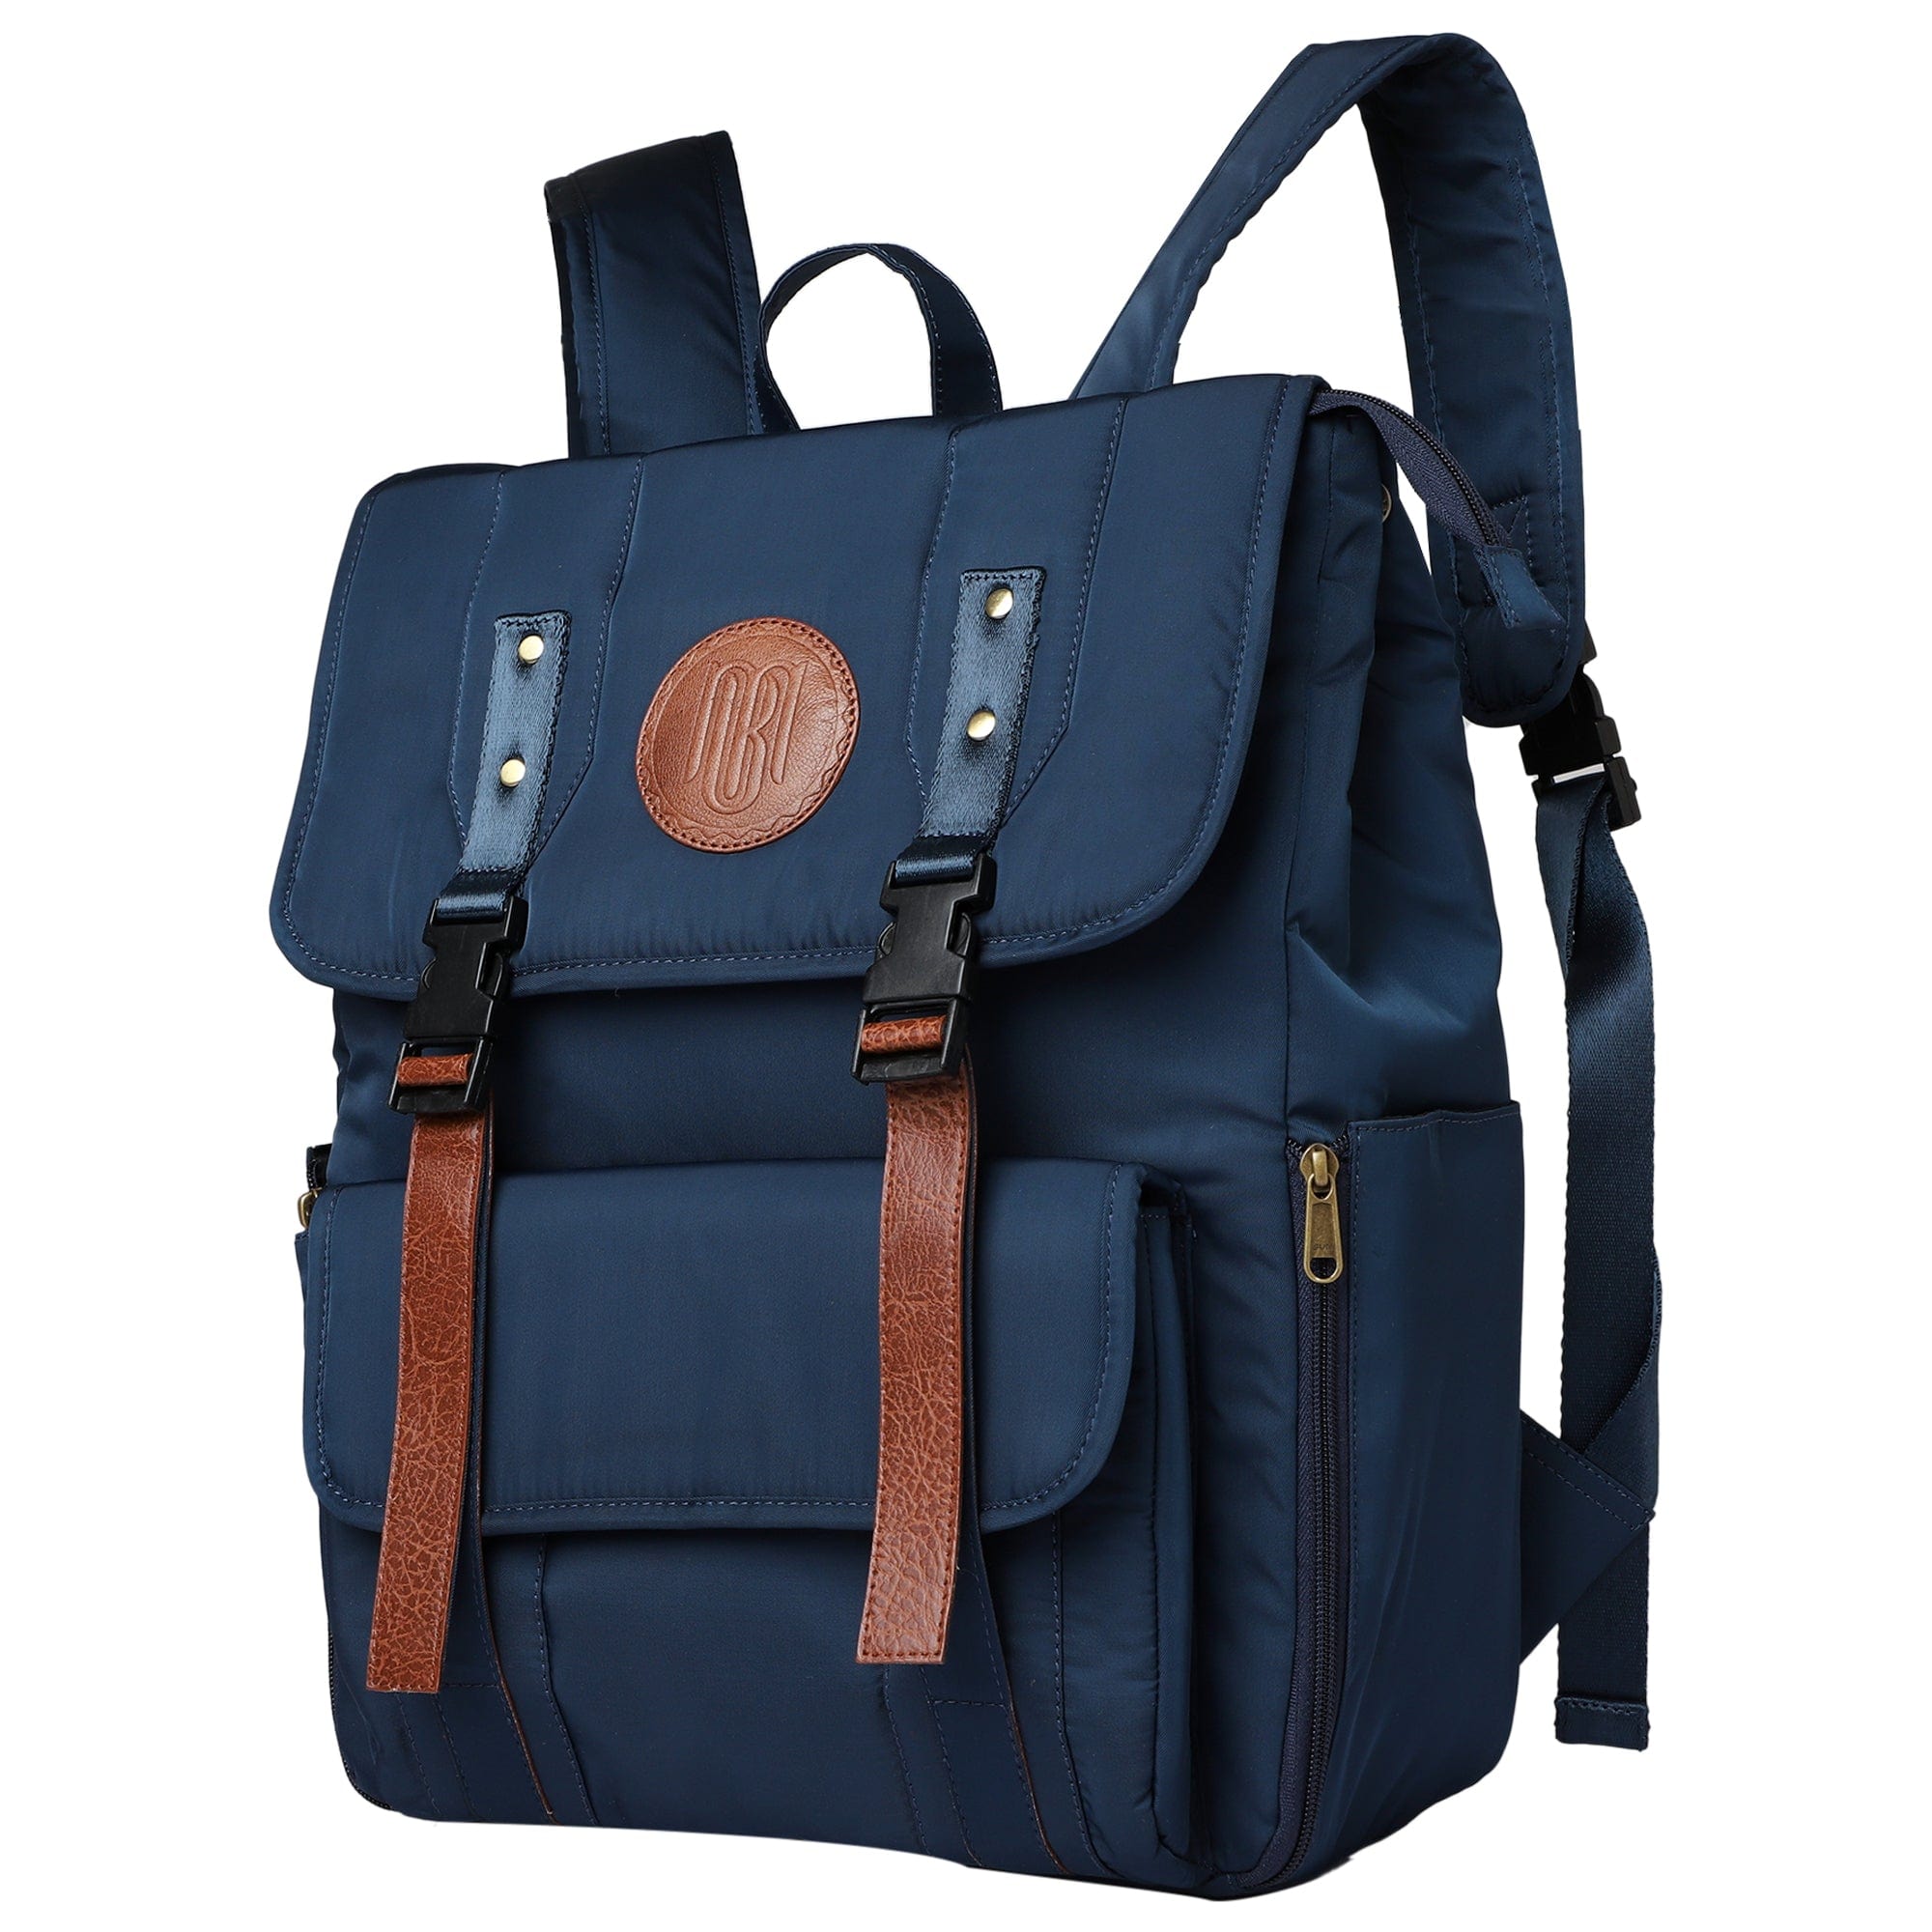 Mona B Unisex Backpack With 14 inches Laptop Compartment: Troy Navy - RP-303 NAV - Backpack by Mona-B - Backpack, Flash Sale, INT_Backpack, New Arrivals, Sale